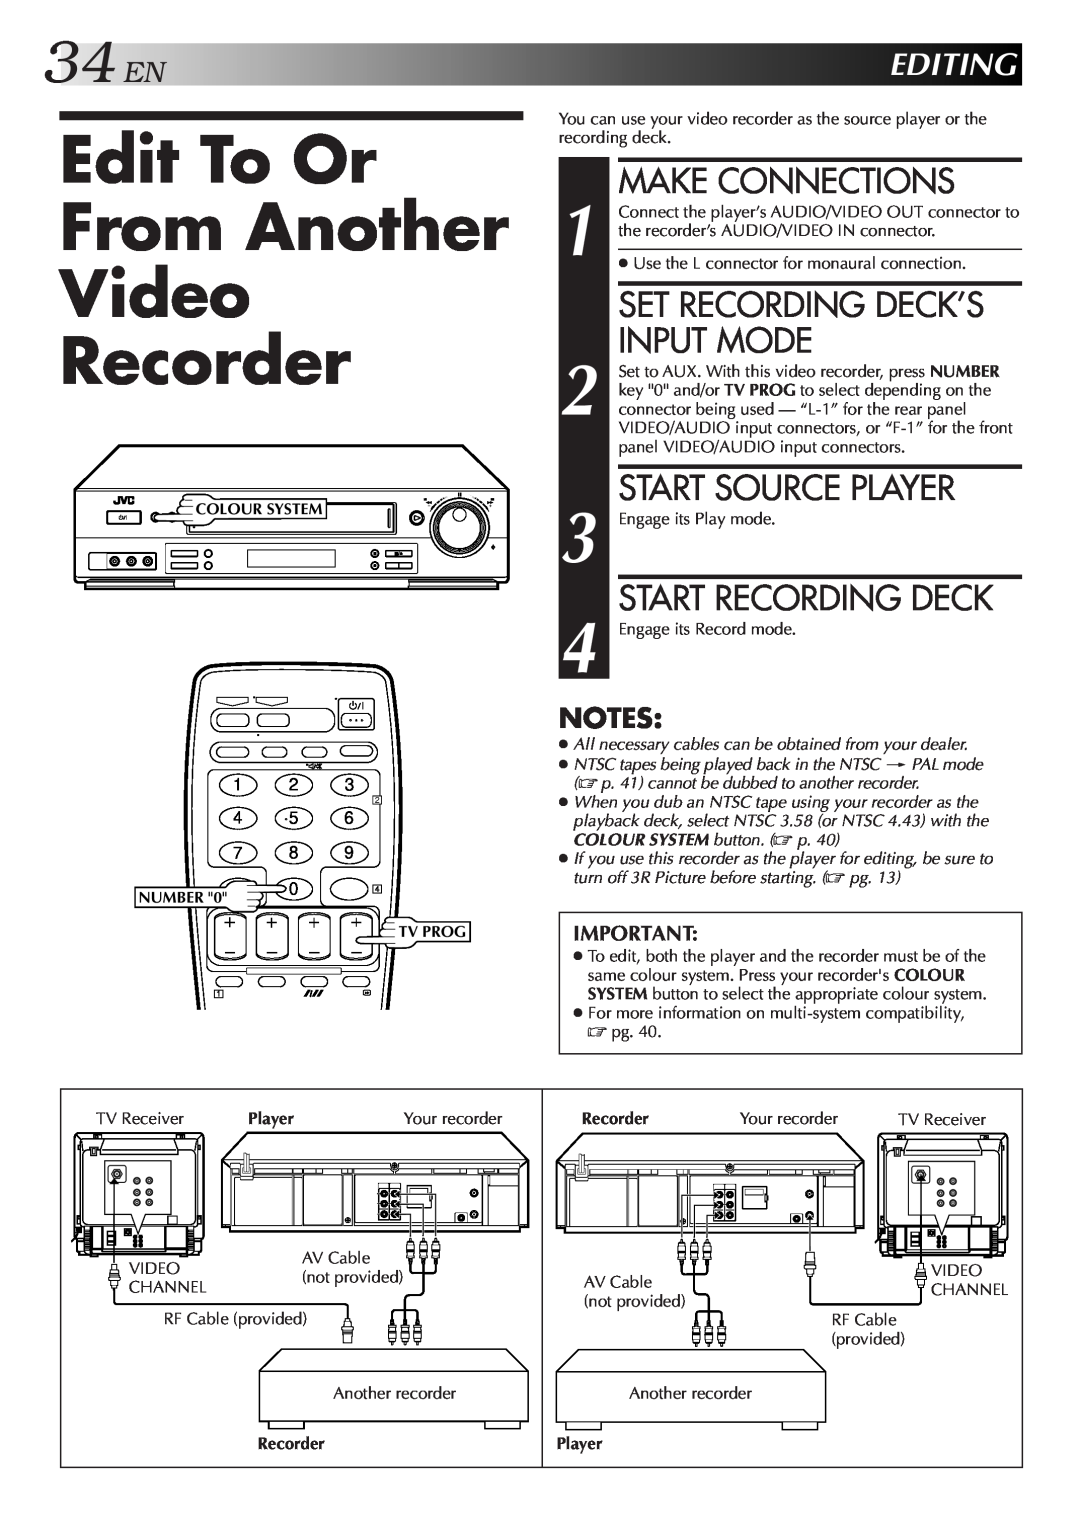 JVC HR-DD857MS Edit To Or From Another Video Recorder, 34EN, Input Mode, Start Source Player, Editing, Make Connections 